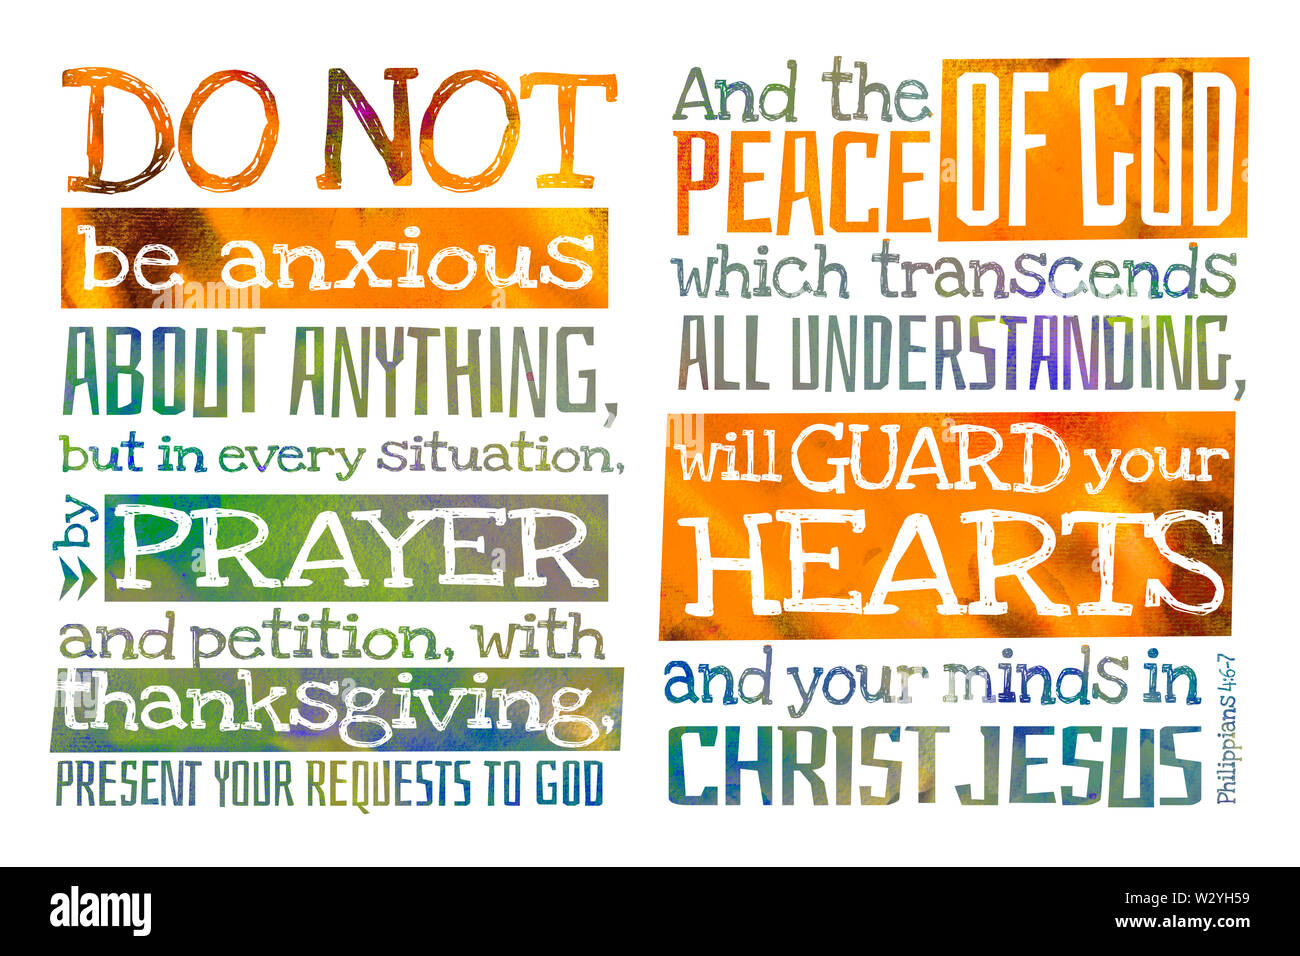 Do not be anxious about anything, And the peace of God, which transcends all understanding, will guard your hearts . (Philippians 4:6-7)  - Bible quot Stock Photo